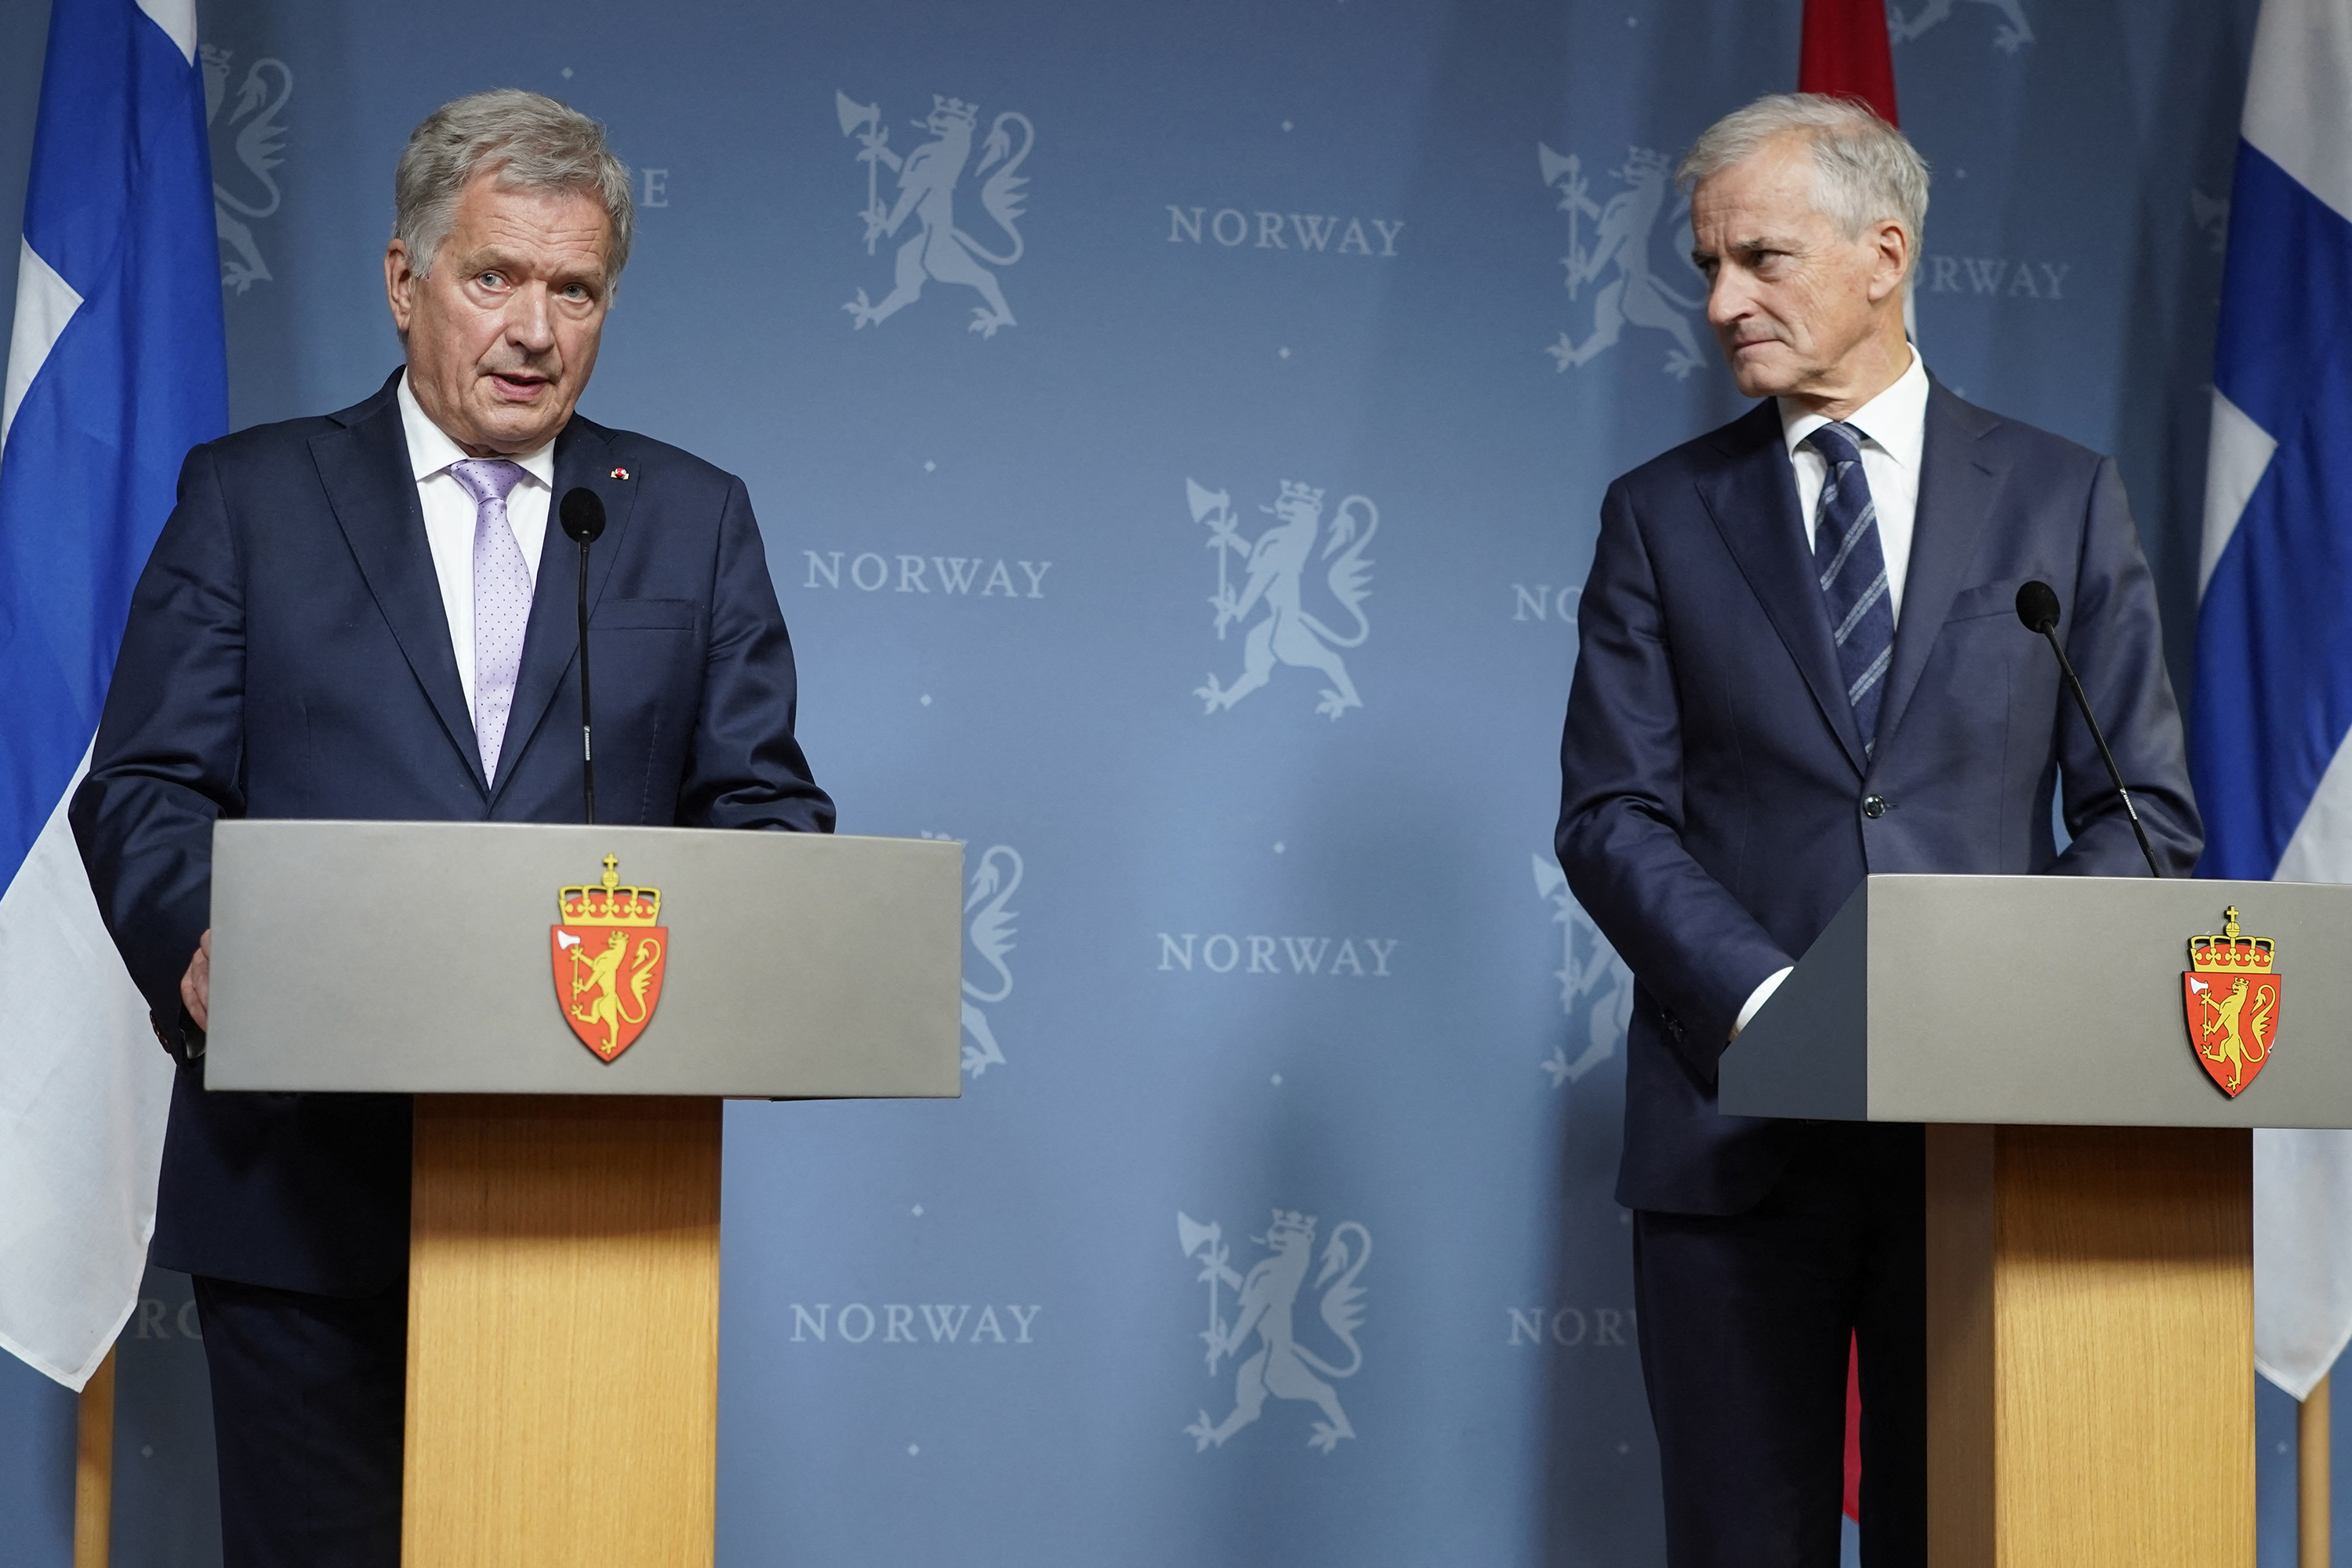 Finland's President Sauli Niinisto (L) and Norway's Prime Minister Jonas Gahr Store hold a joint press conference after a meeting in Oslo, Norway, on October 10.